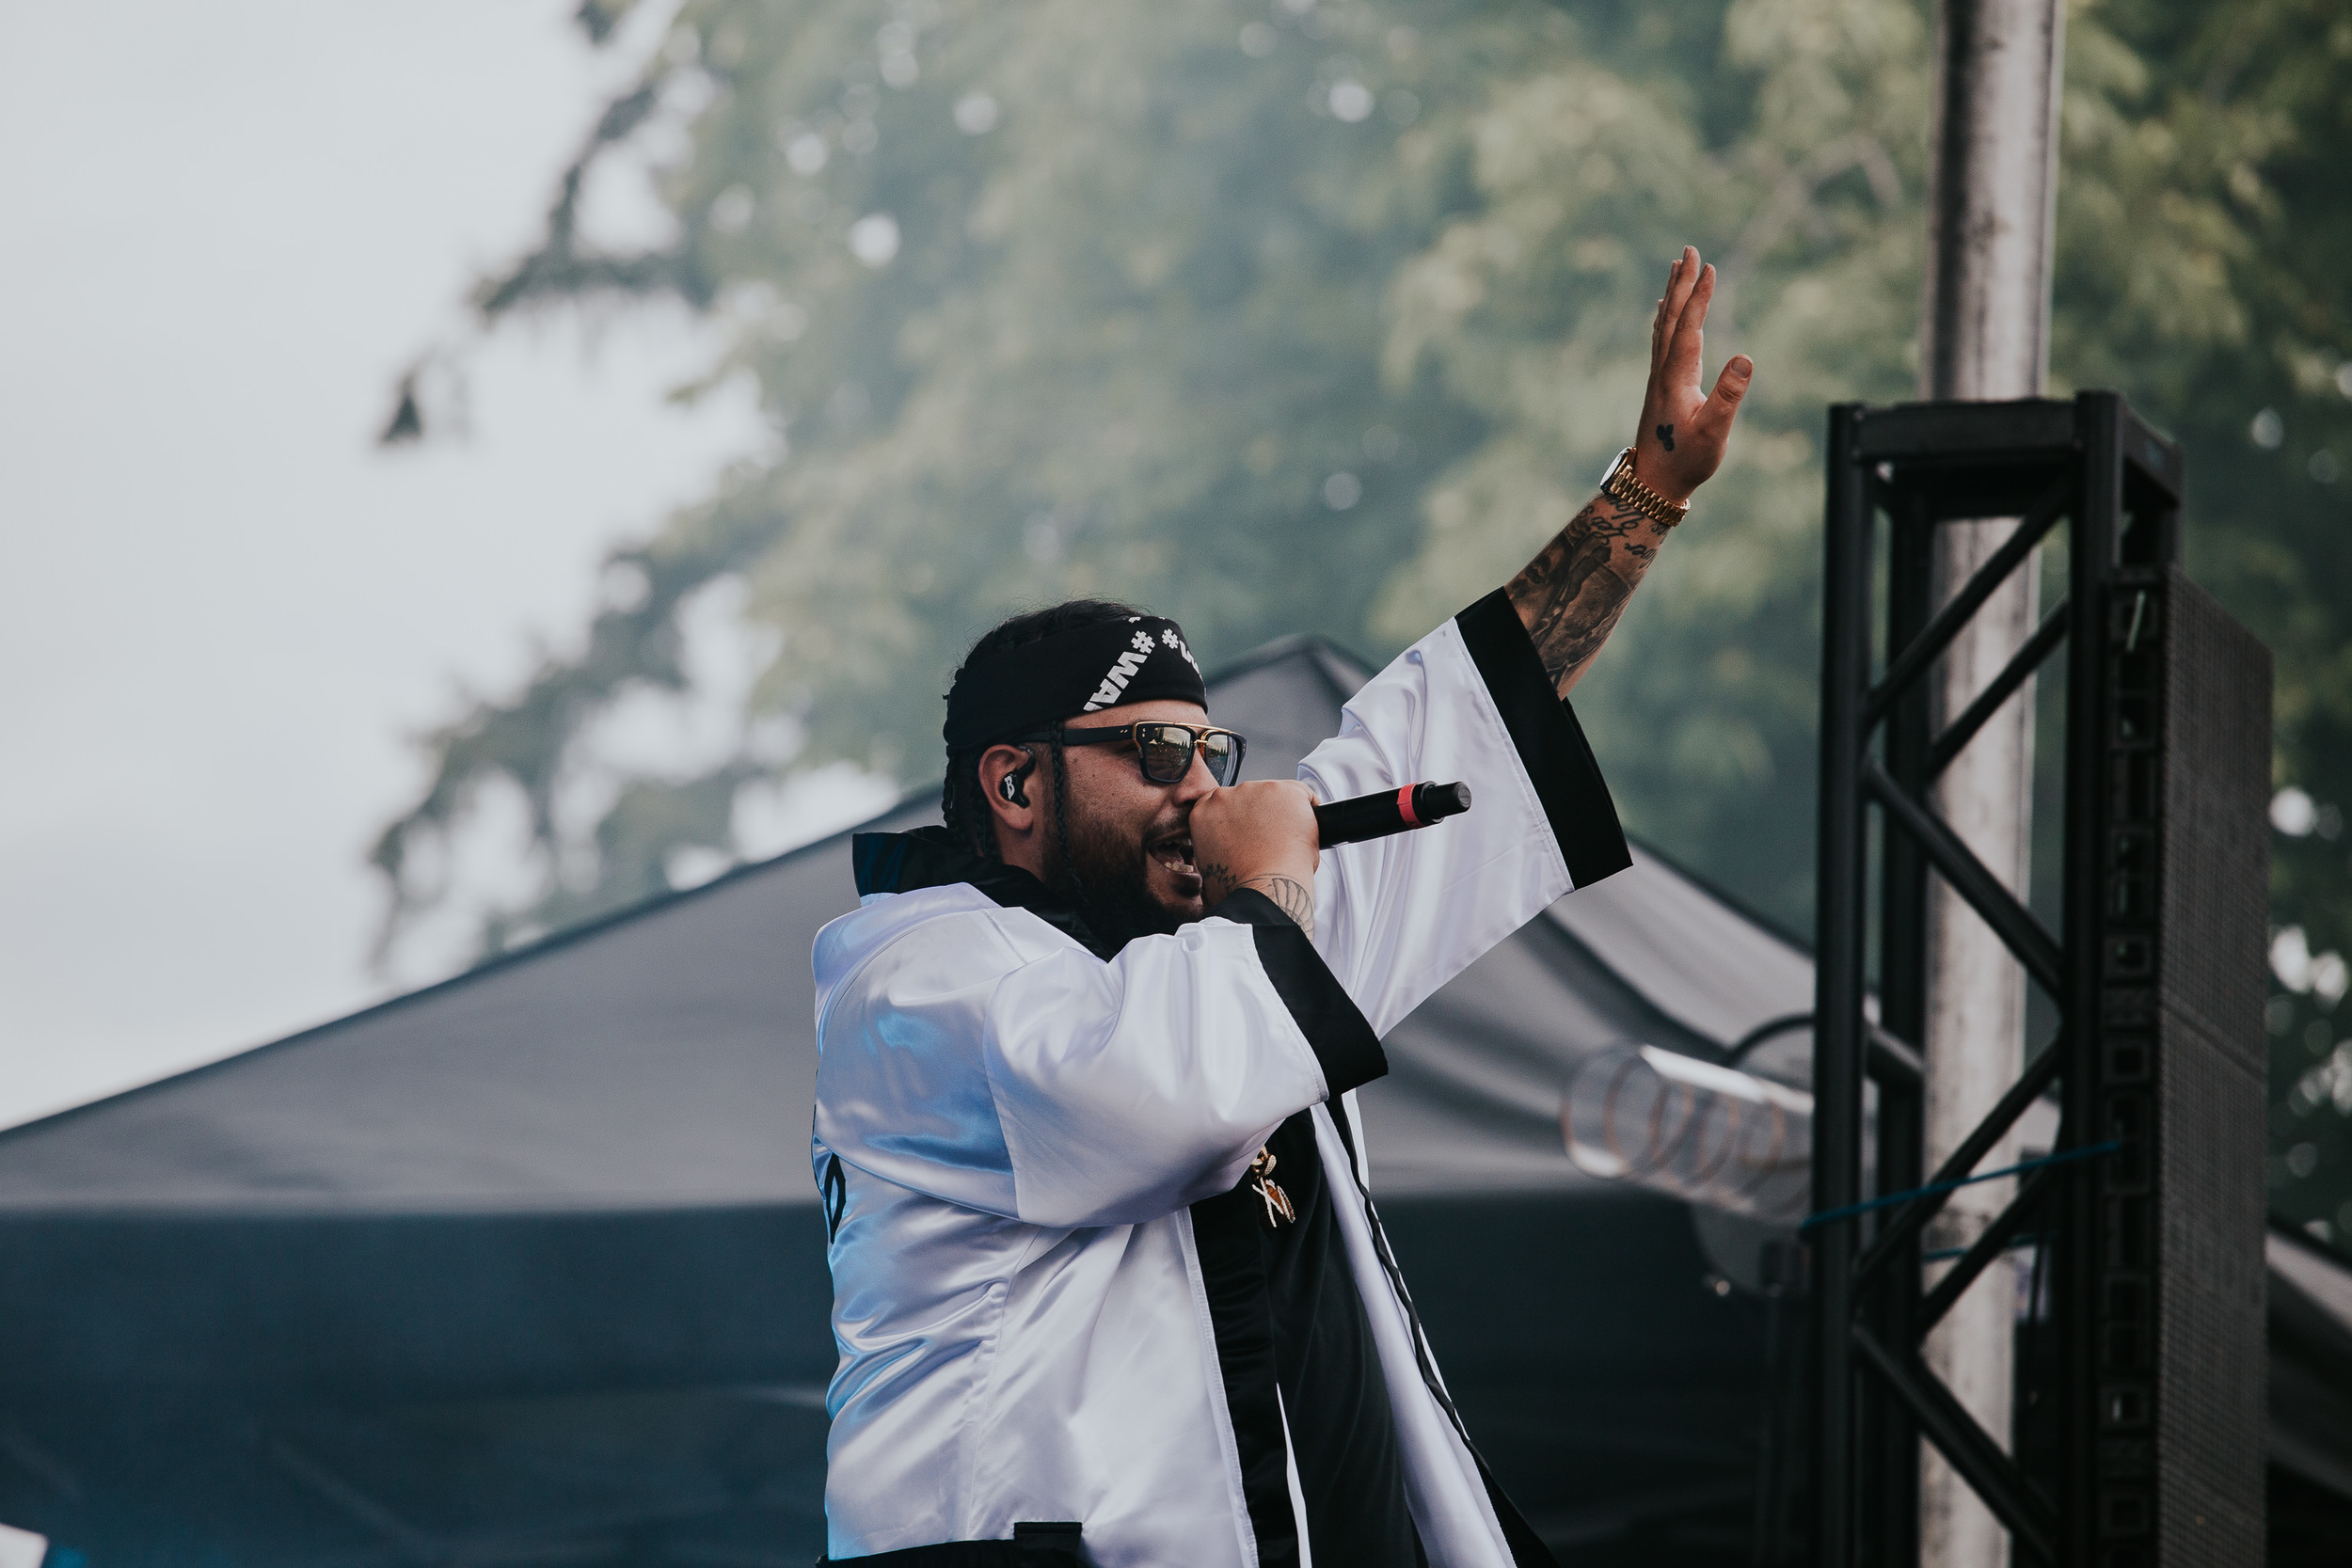 7_Belly_Waka_Flocka_Flame_Holland_Park_FVDED_Timothy_Nguyen_20160702 (13 of 13).jpg